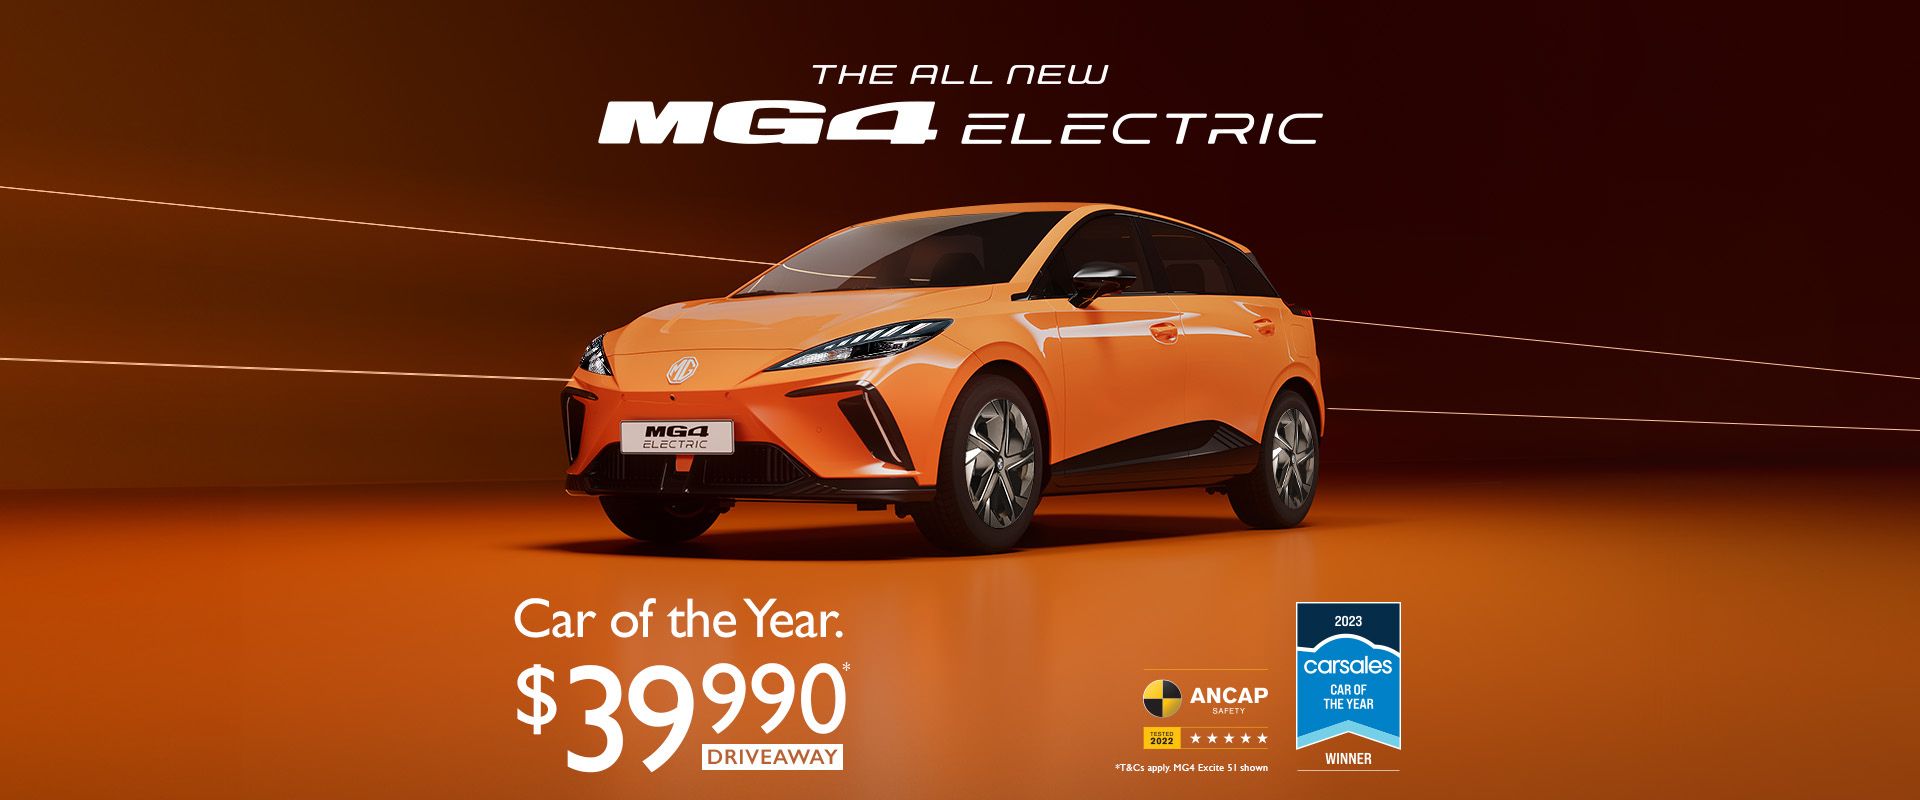 The All New MG4 Electric. Car of the Year $39990 Driveaway.